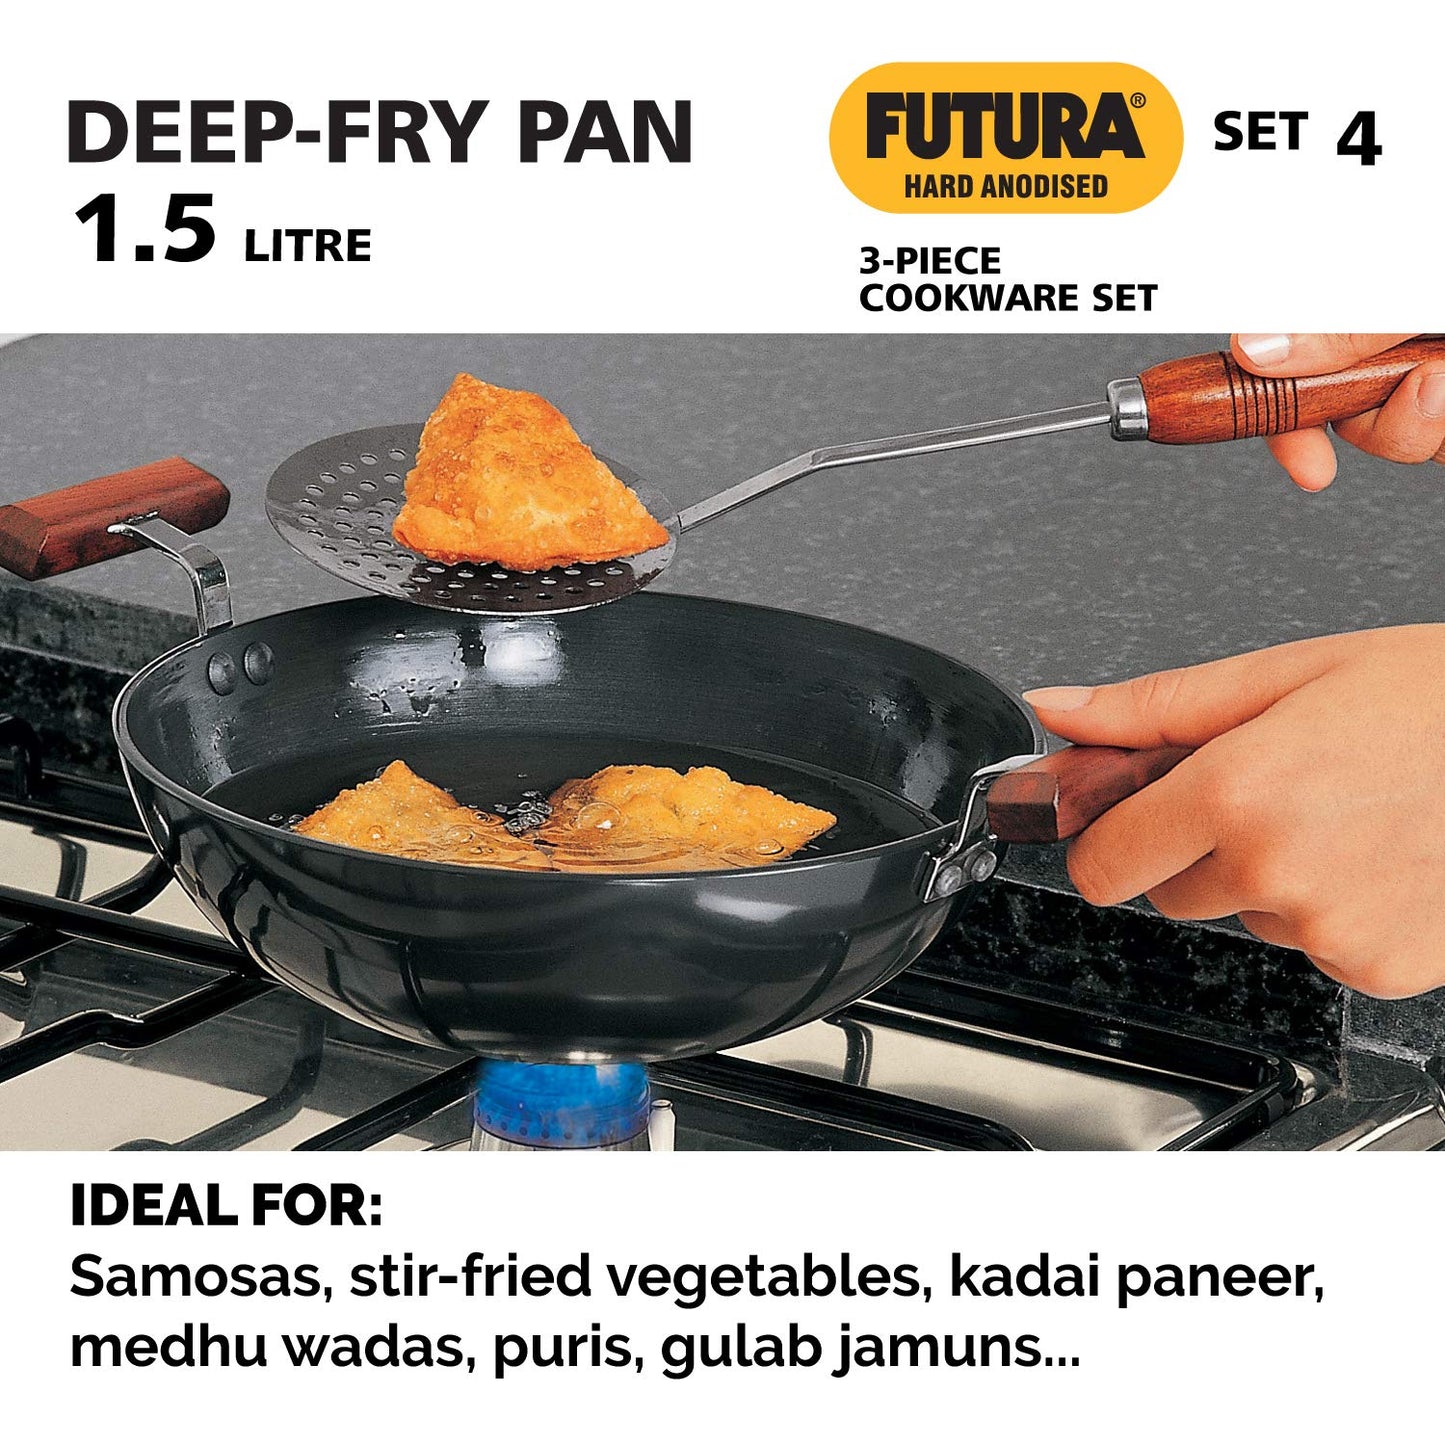 Hawkins Futura 3 Pieces Hard Anodised Cookware Set 4 - 22cm Tava, 2 Litres Cook and Serve Bowl with One Hard Anodised Lid and 1.5 Litres Deep Fry Pan - ASET4